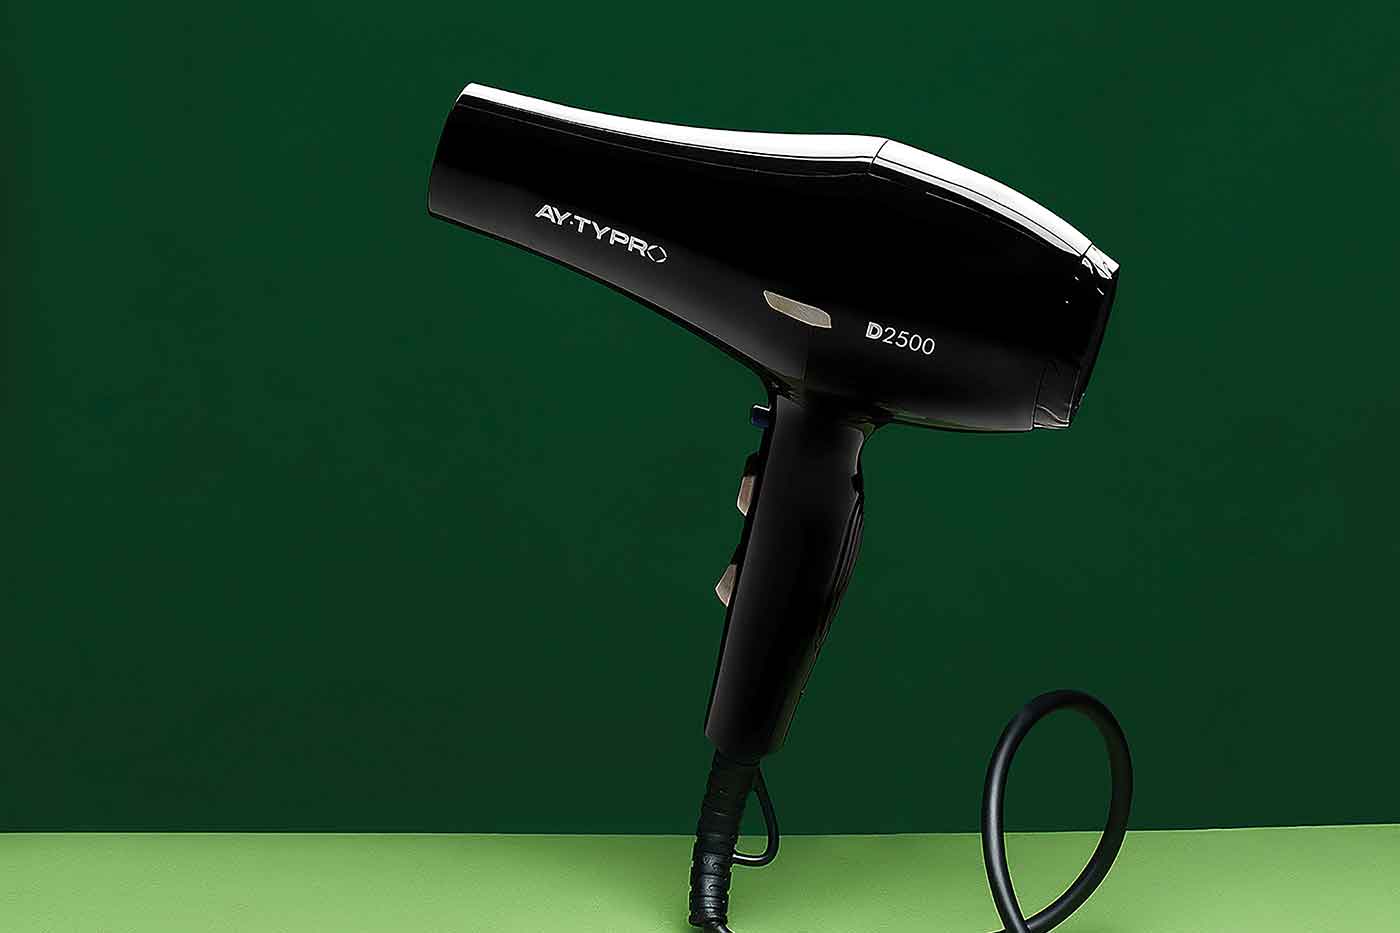 Elevate your hair styling game with the D2500 Hair Dryer